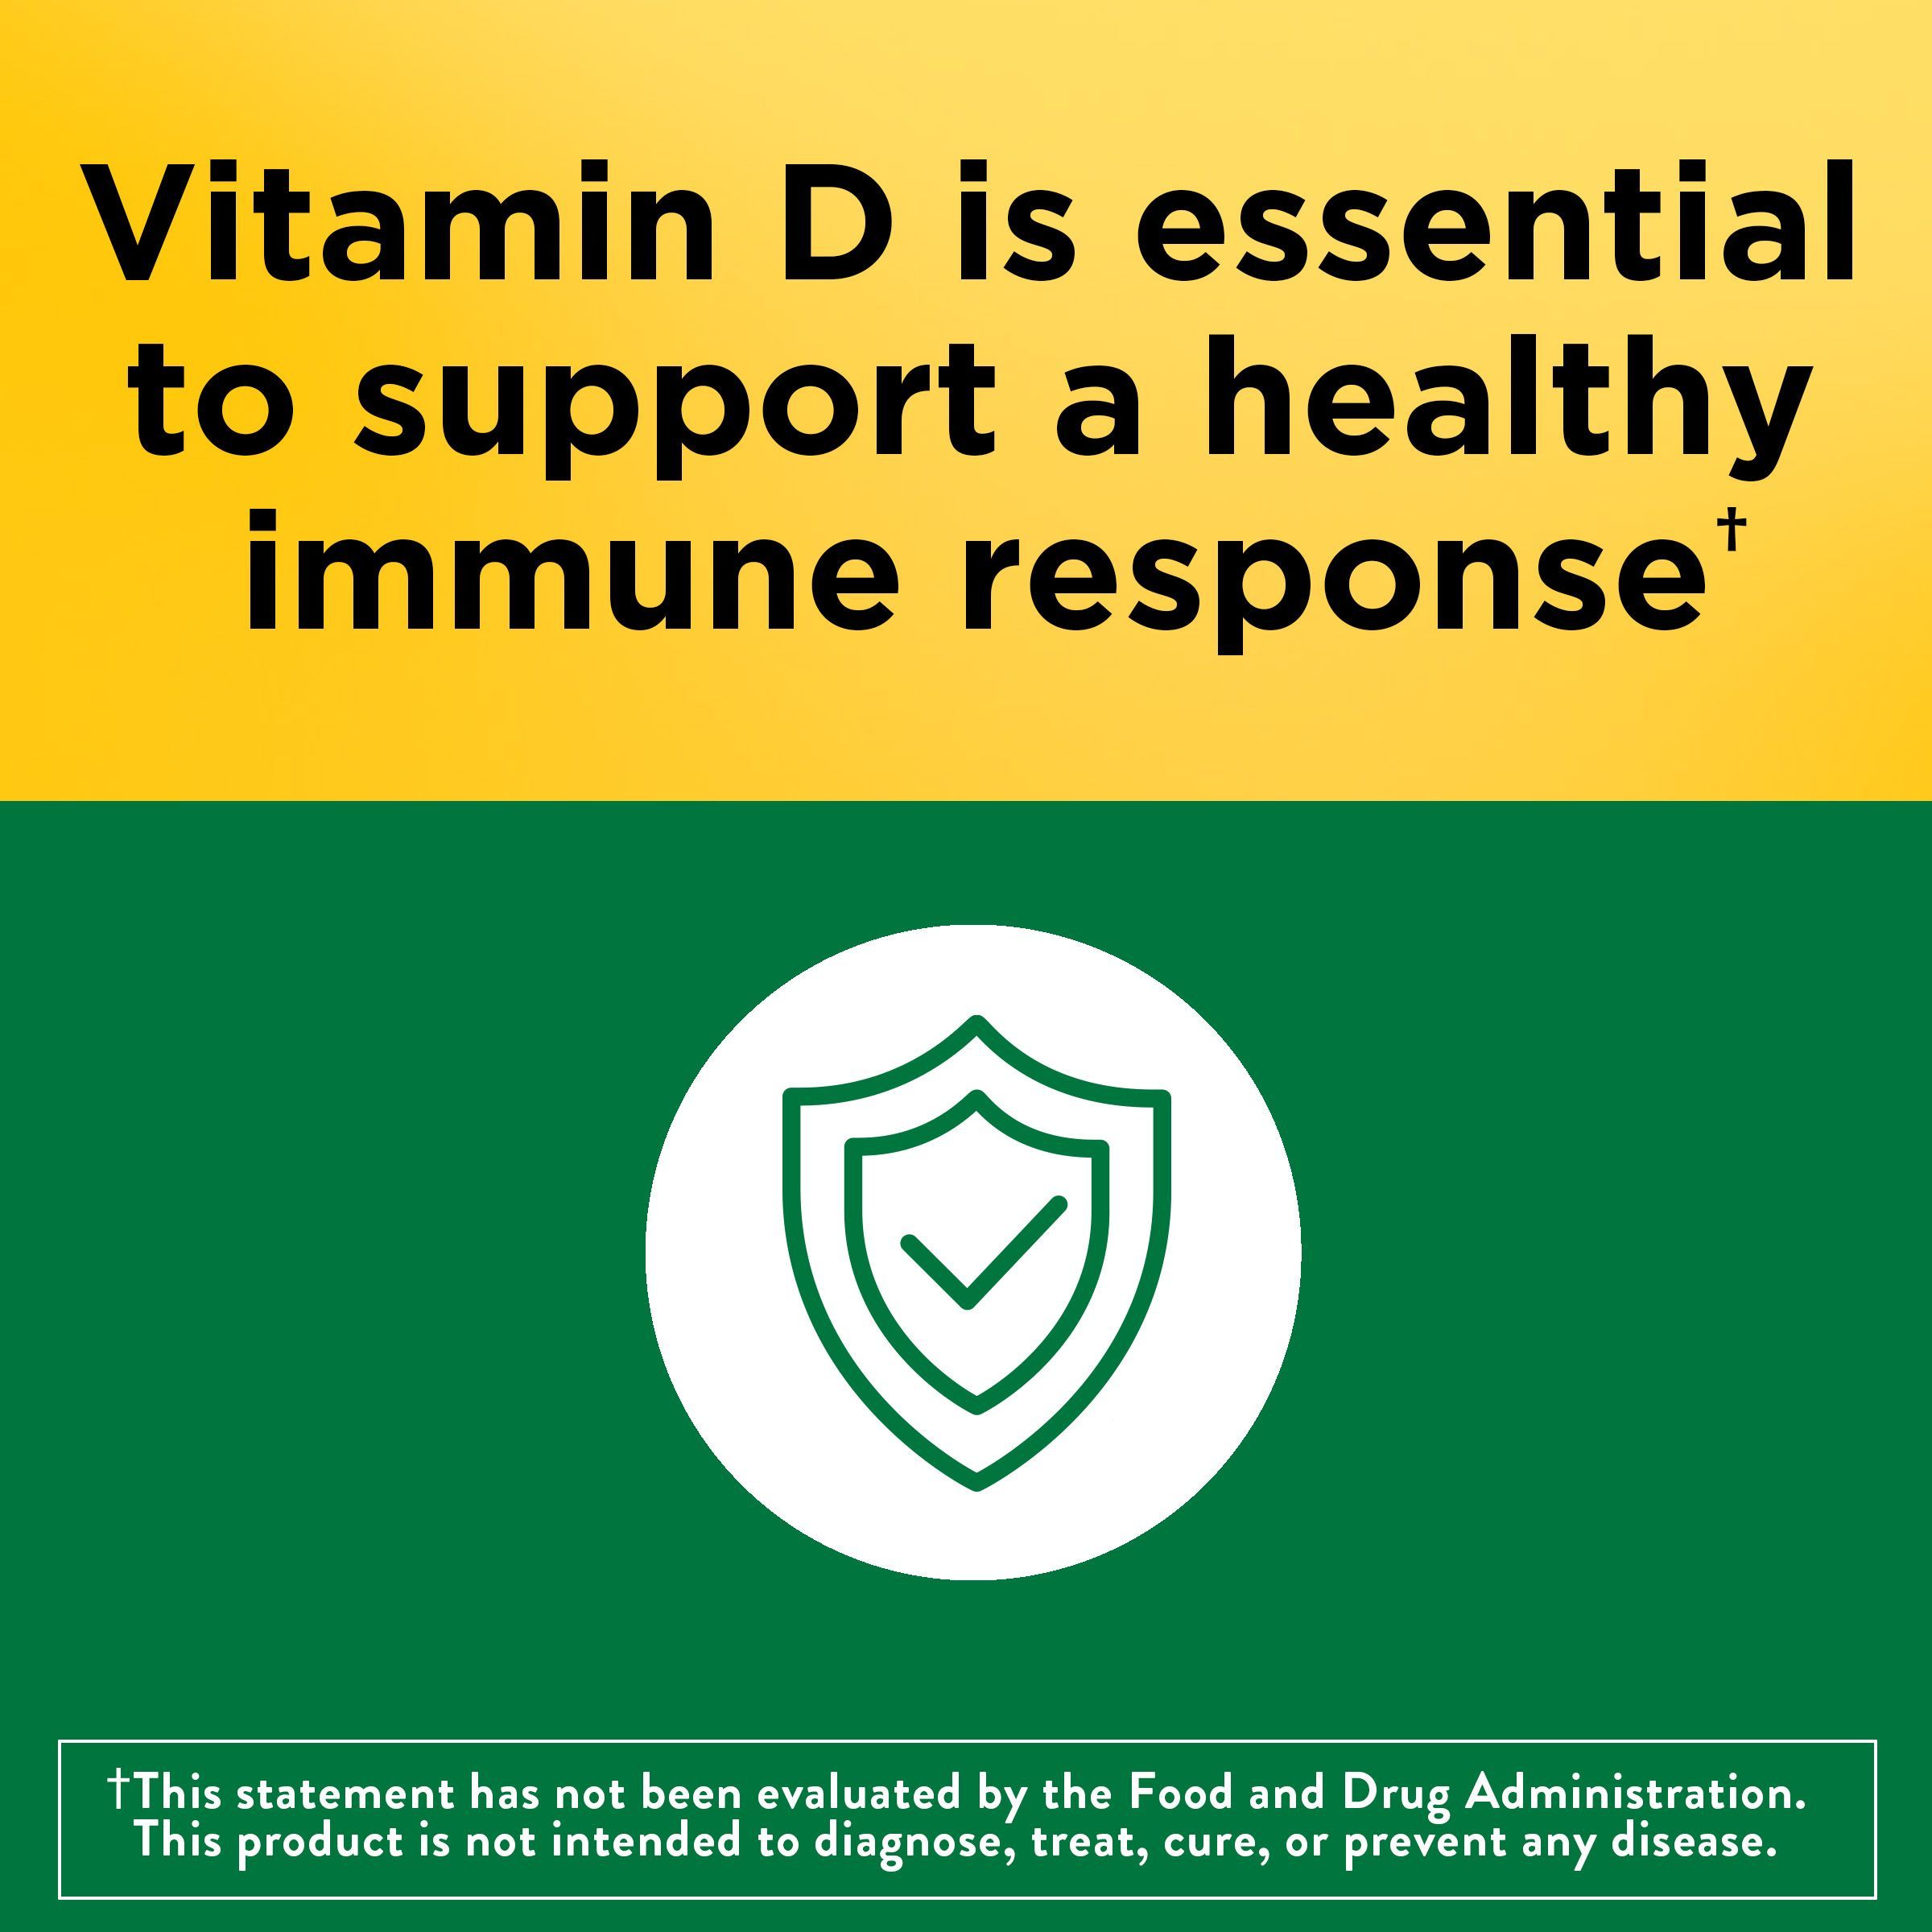 Nature Made Vitamin D3 2000 IU (50 mcg) Softgels, Dietary Supplement for Bone and Immune Health Support, 260 Count - image 5 of 15